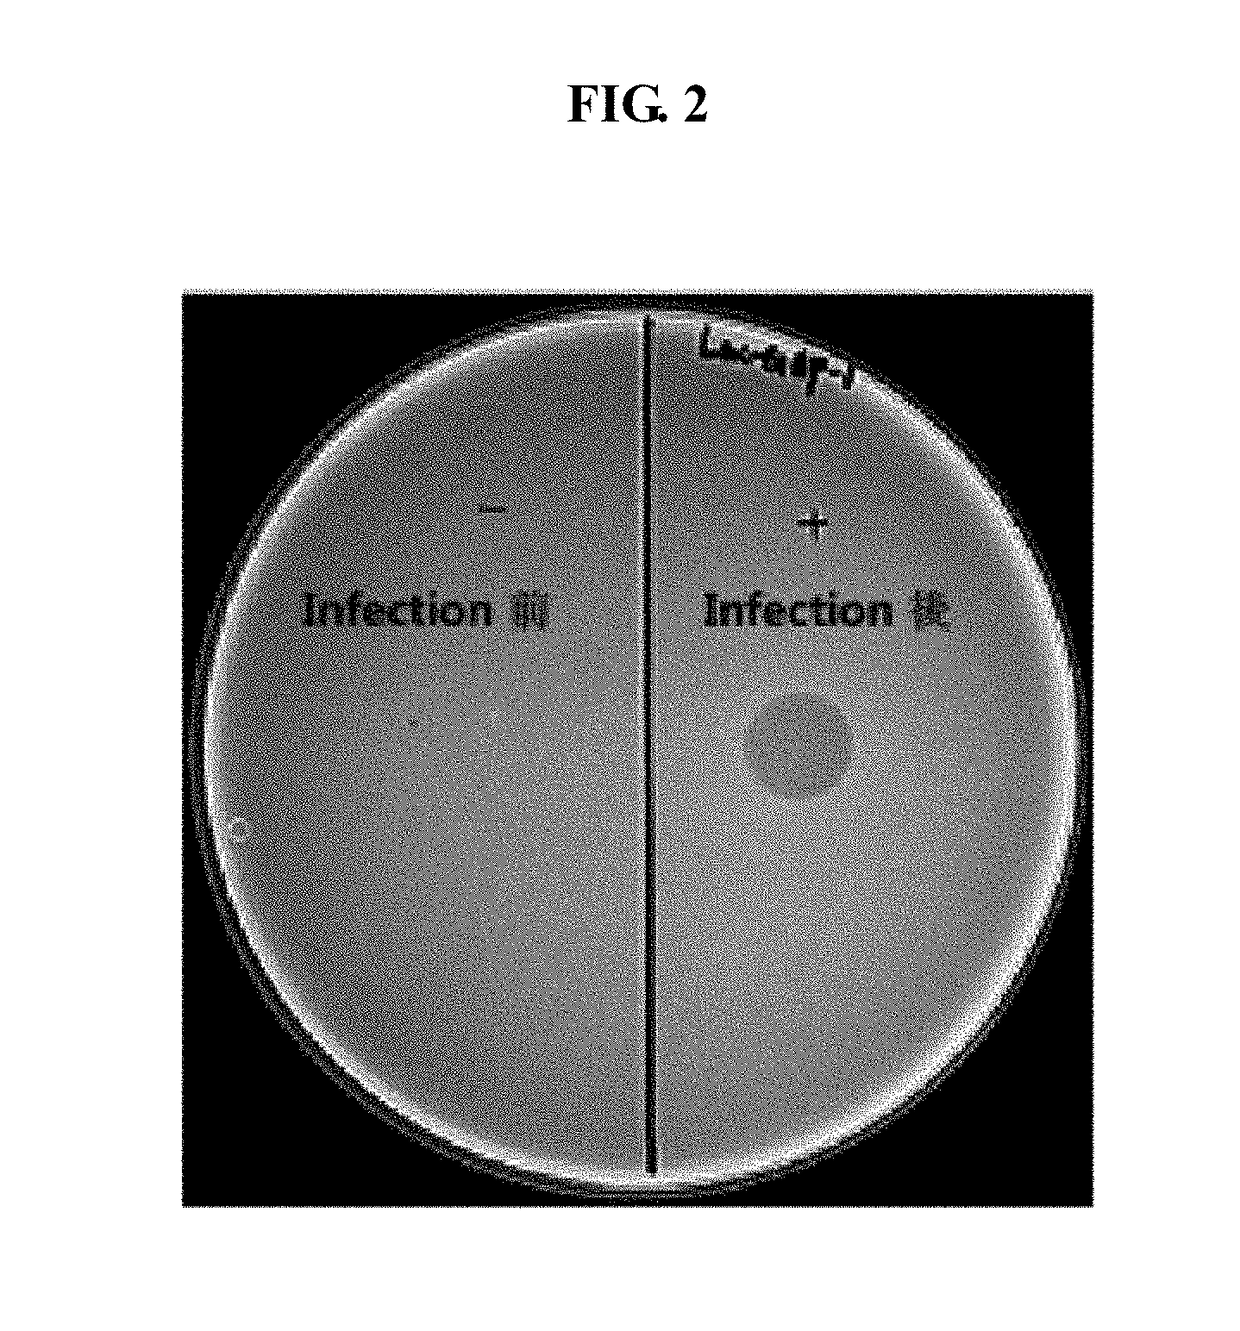 Novel lactococcus garvieae bacteriophage lac-gap-1 and use thereof in suppressing proliferation of lactococcus garvieae bacteria